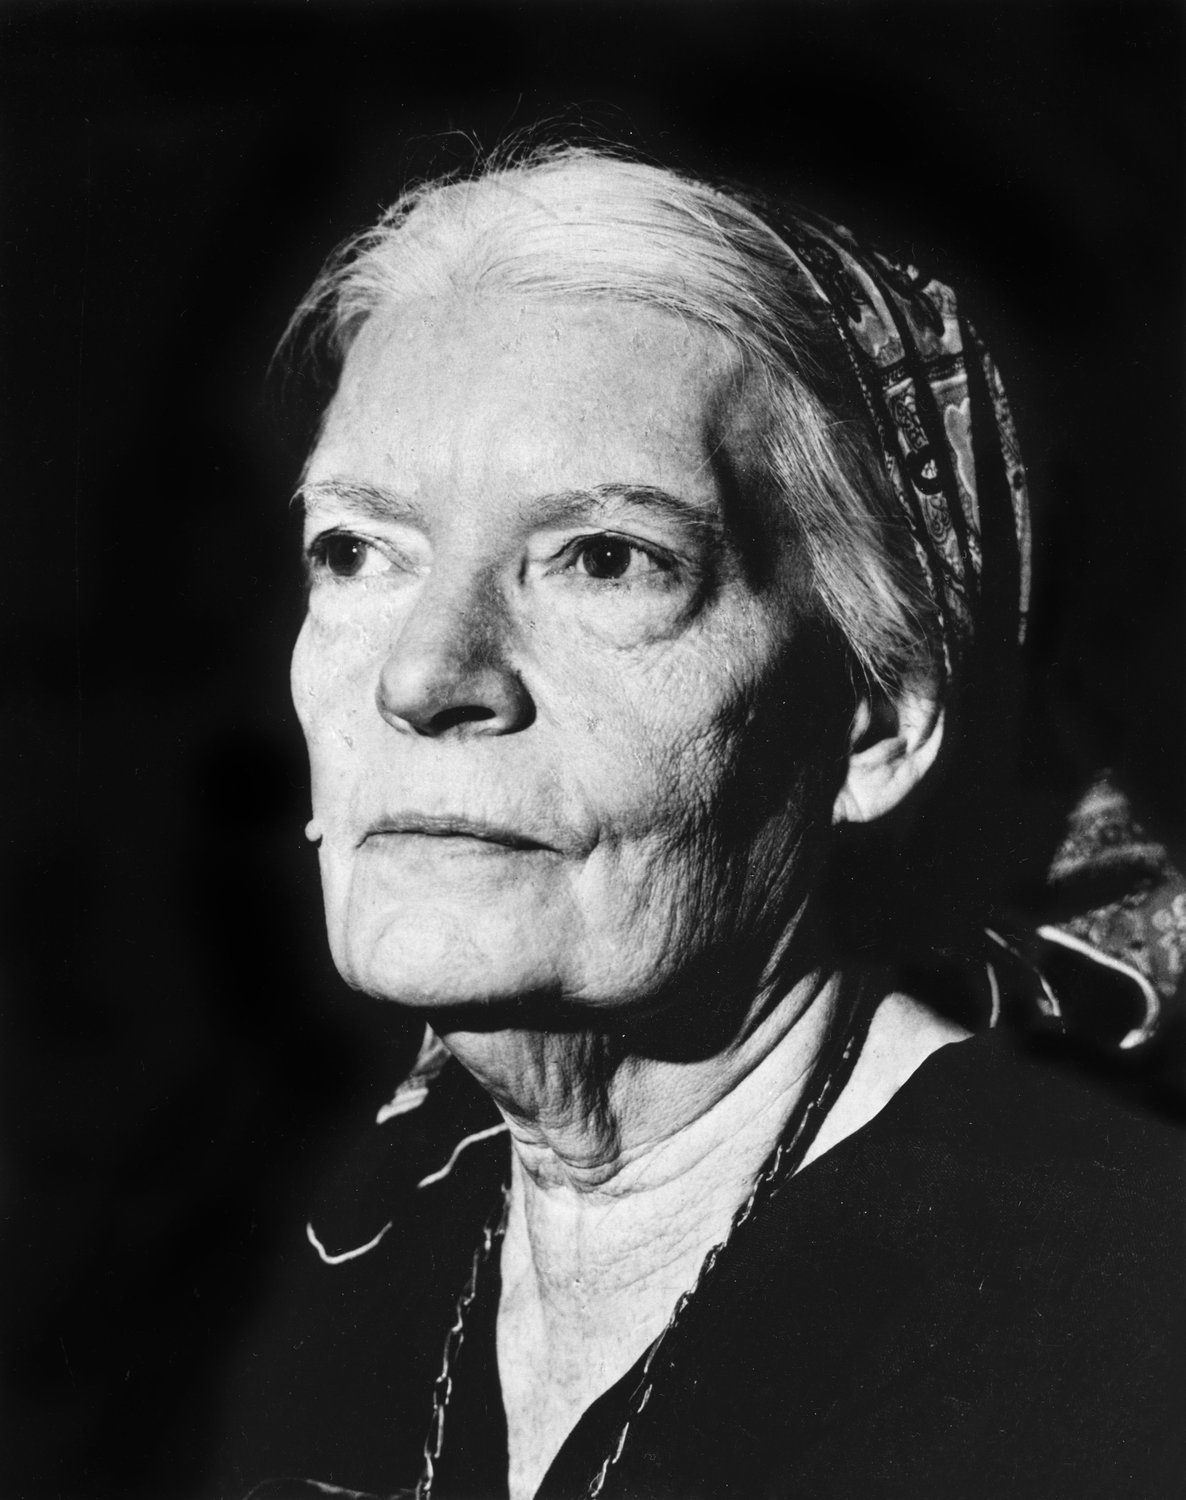 A still from the film “Revolution of the Heart: The Dorothy Day Story.”